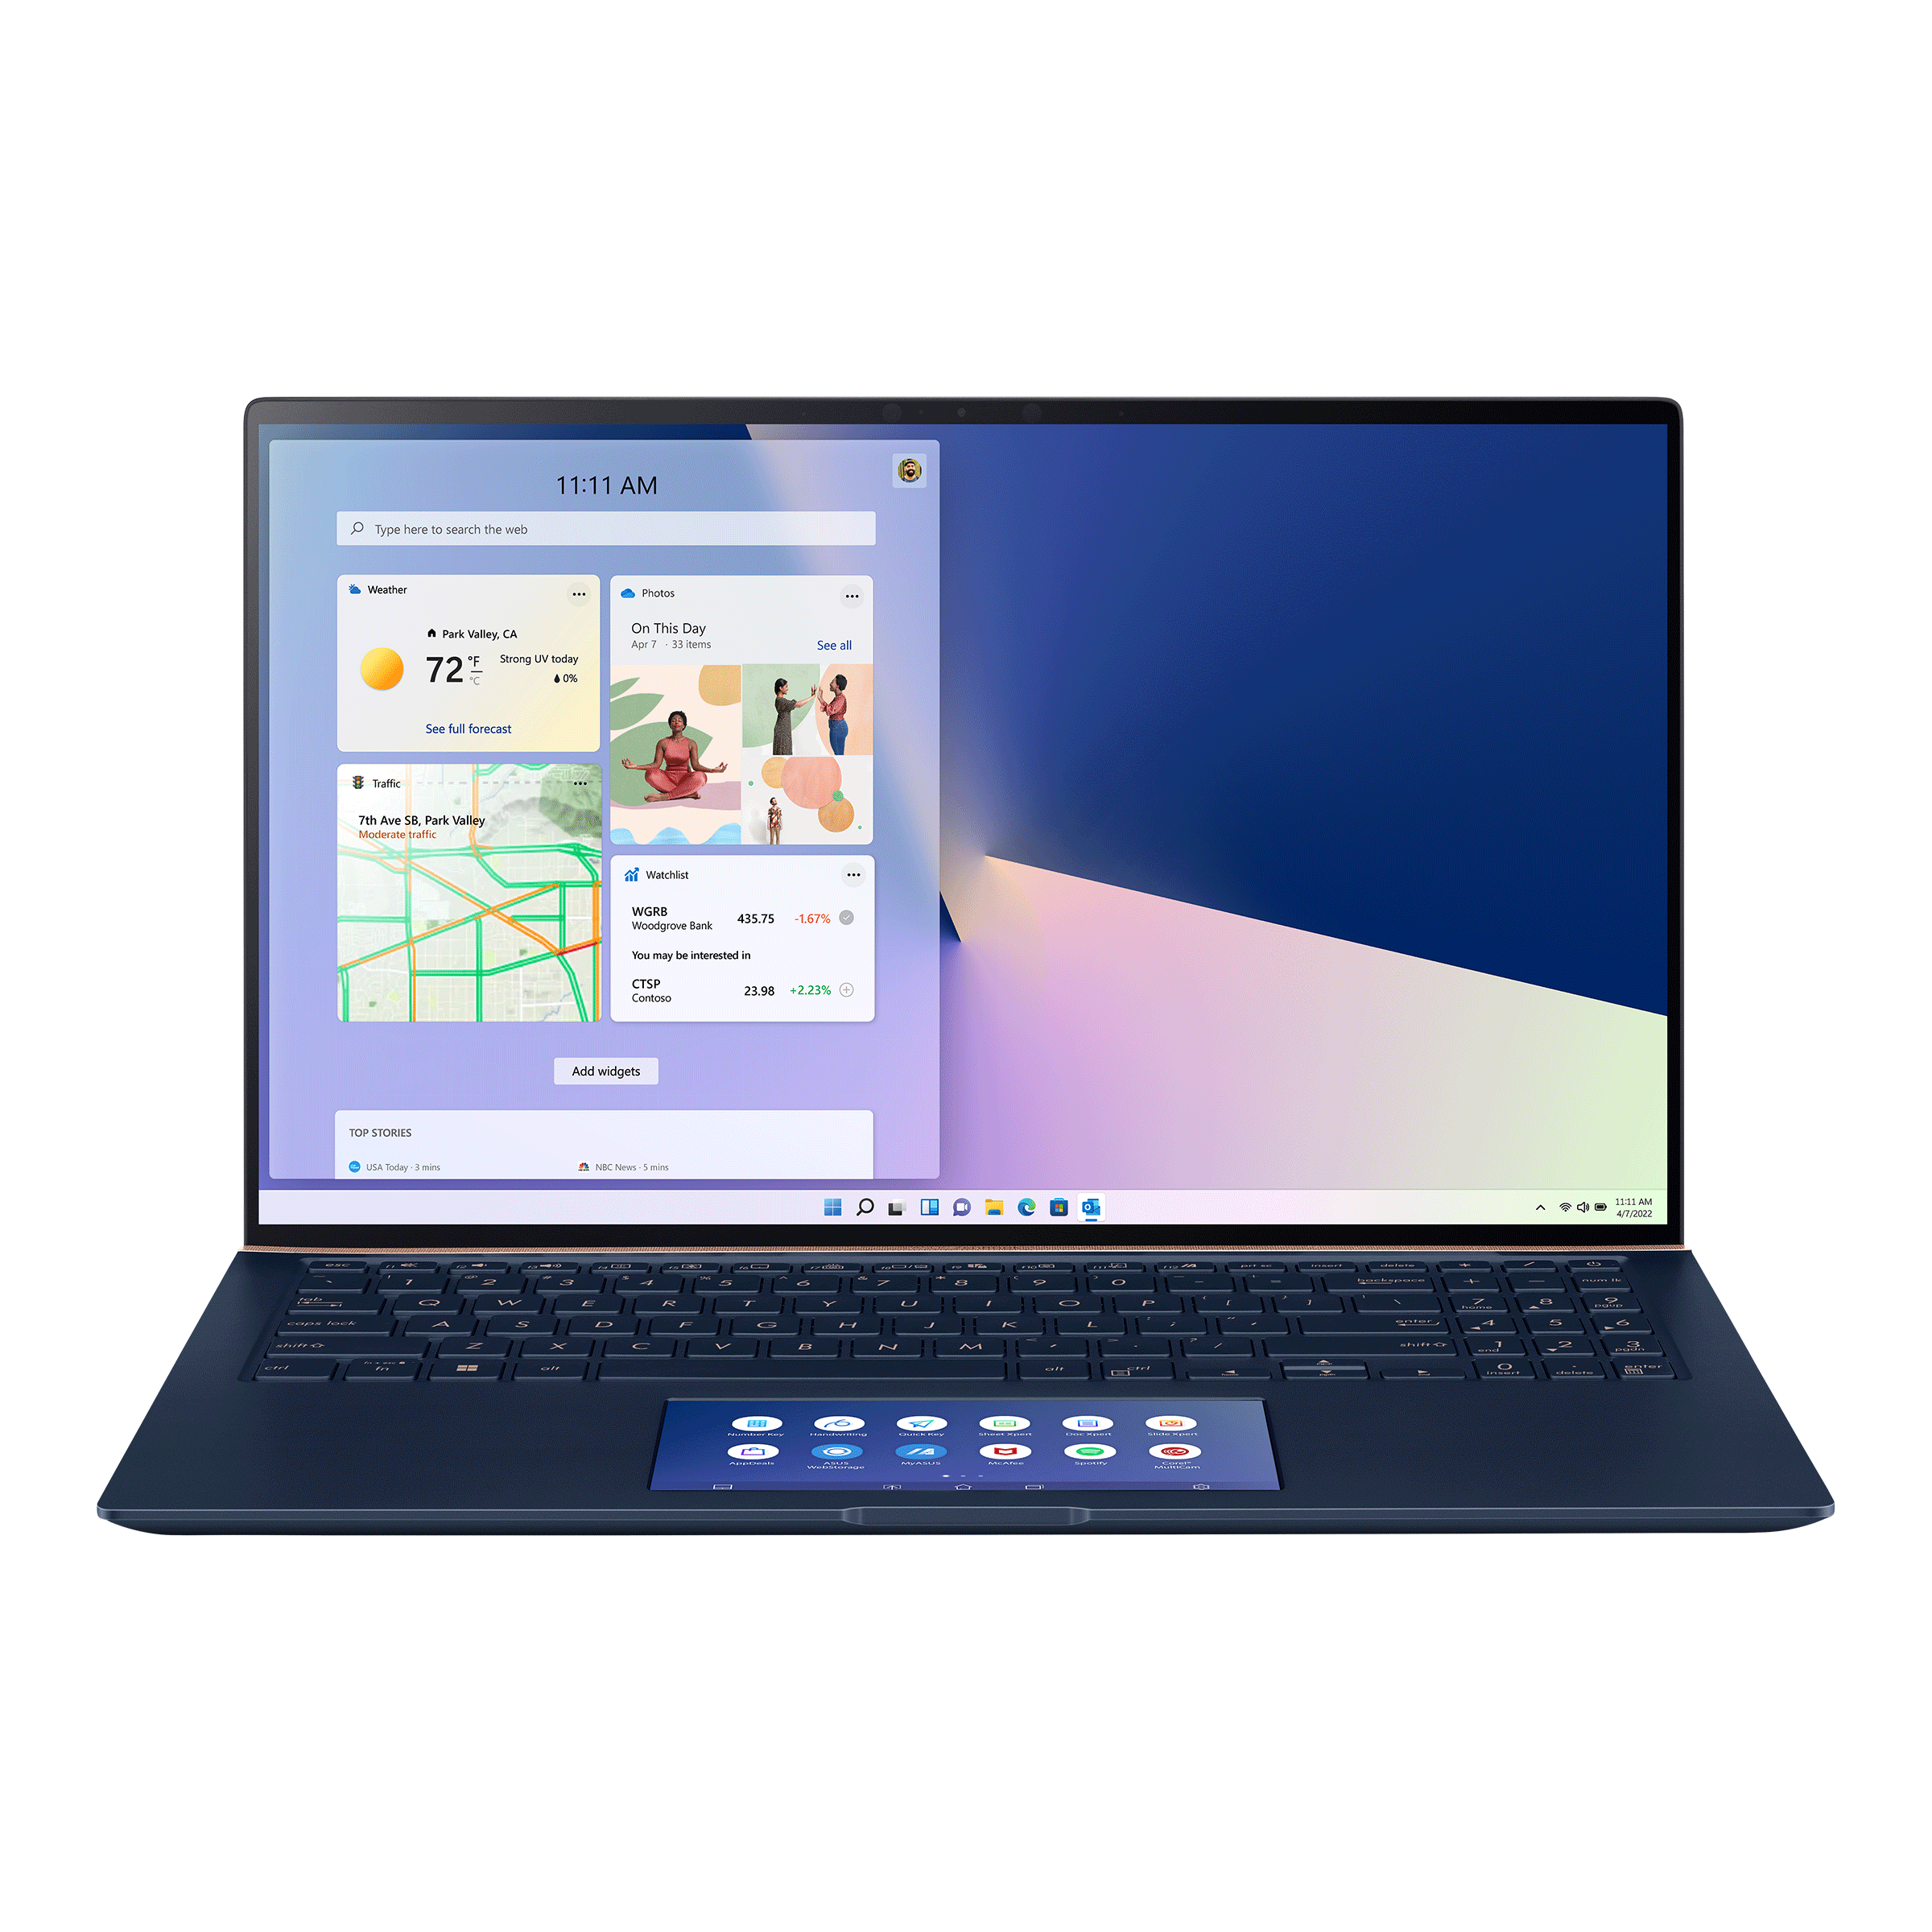 ASUS Zenbook S13 UX392｜Laptops For Home｜ASUS Canada